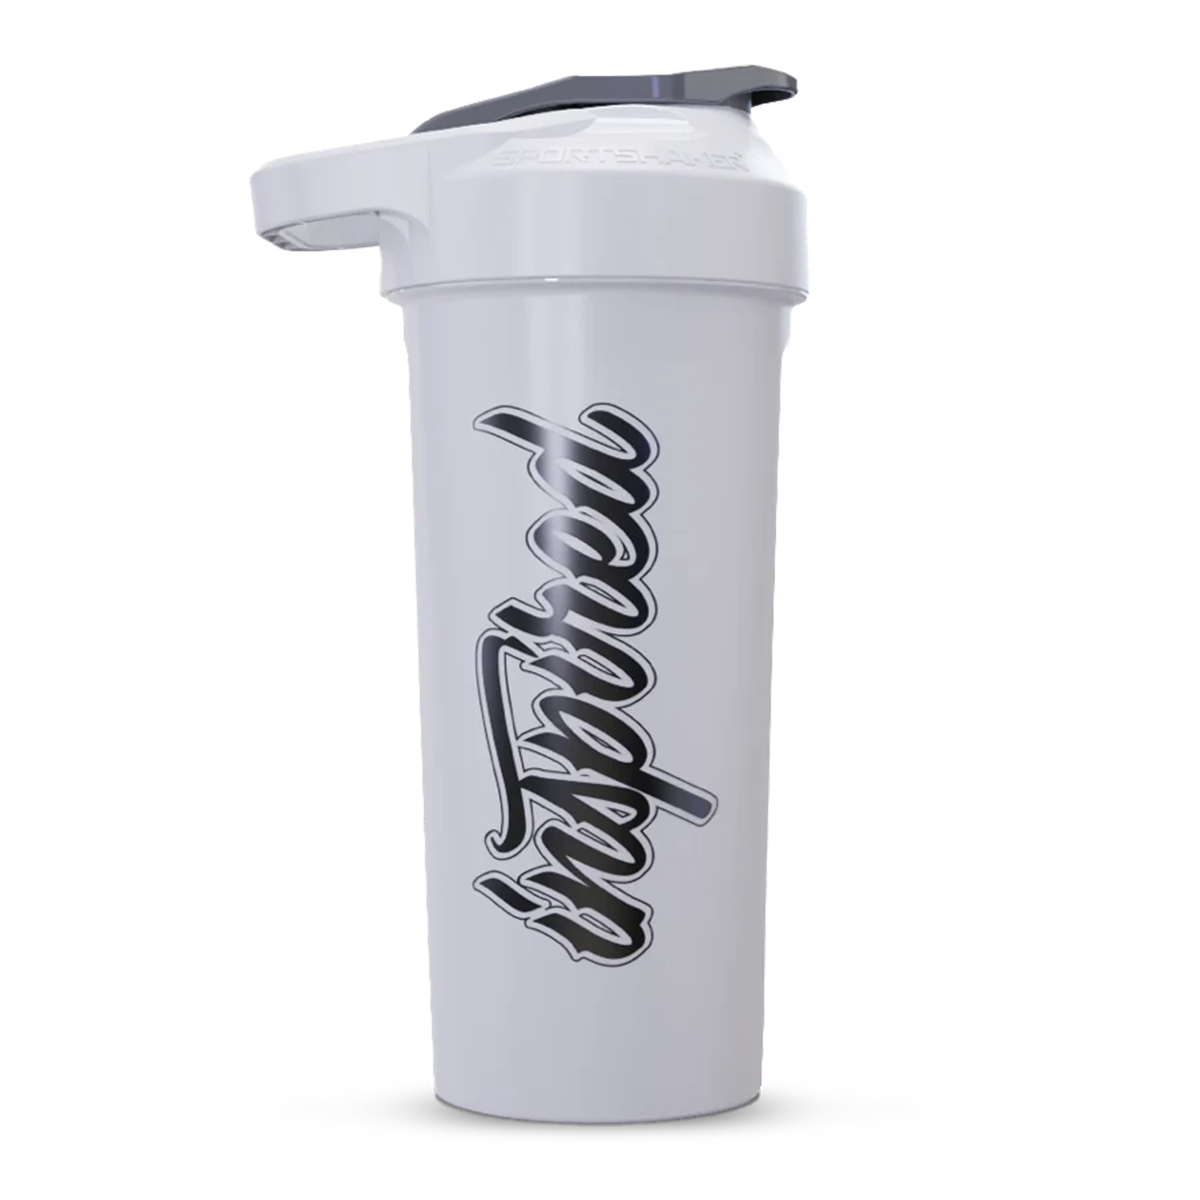 Limited Edition Insulated Shaker Bottle, Madi Ditler Fit